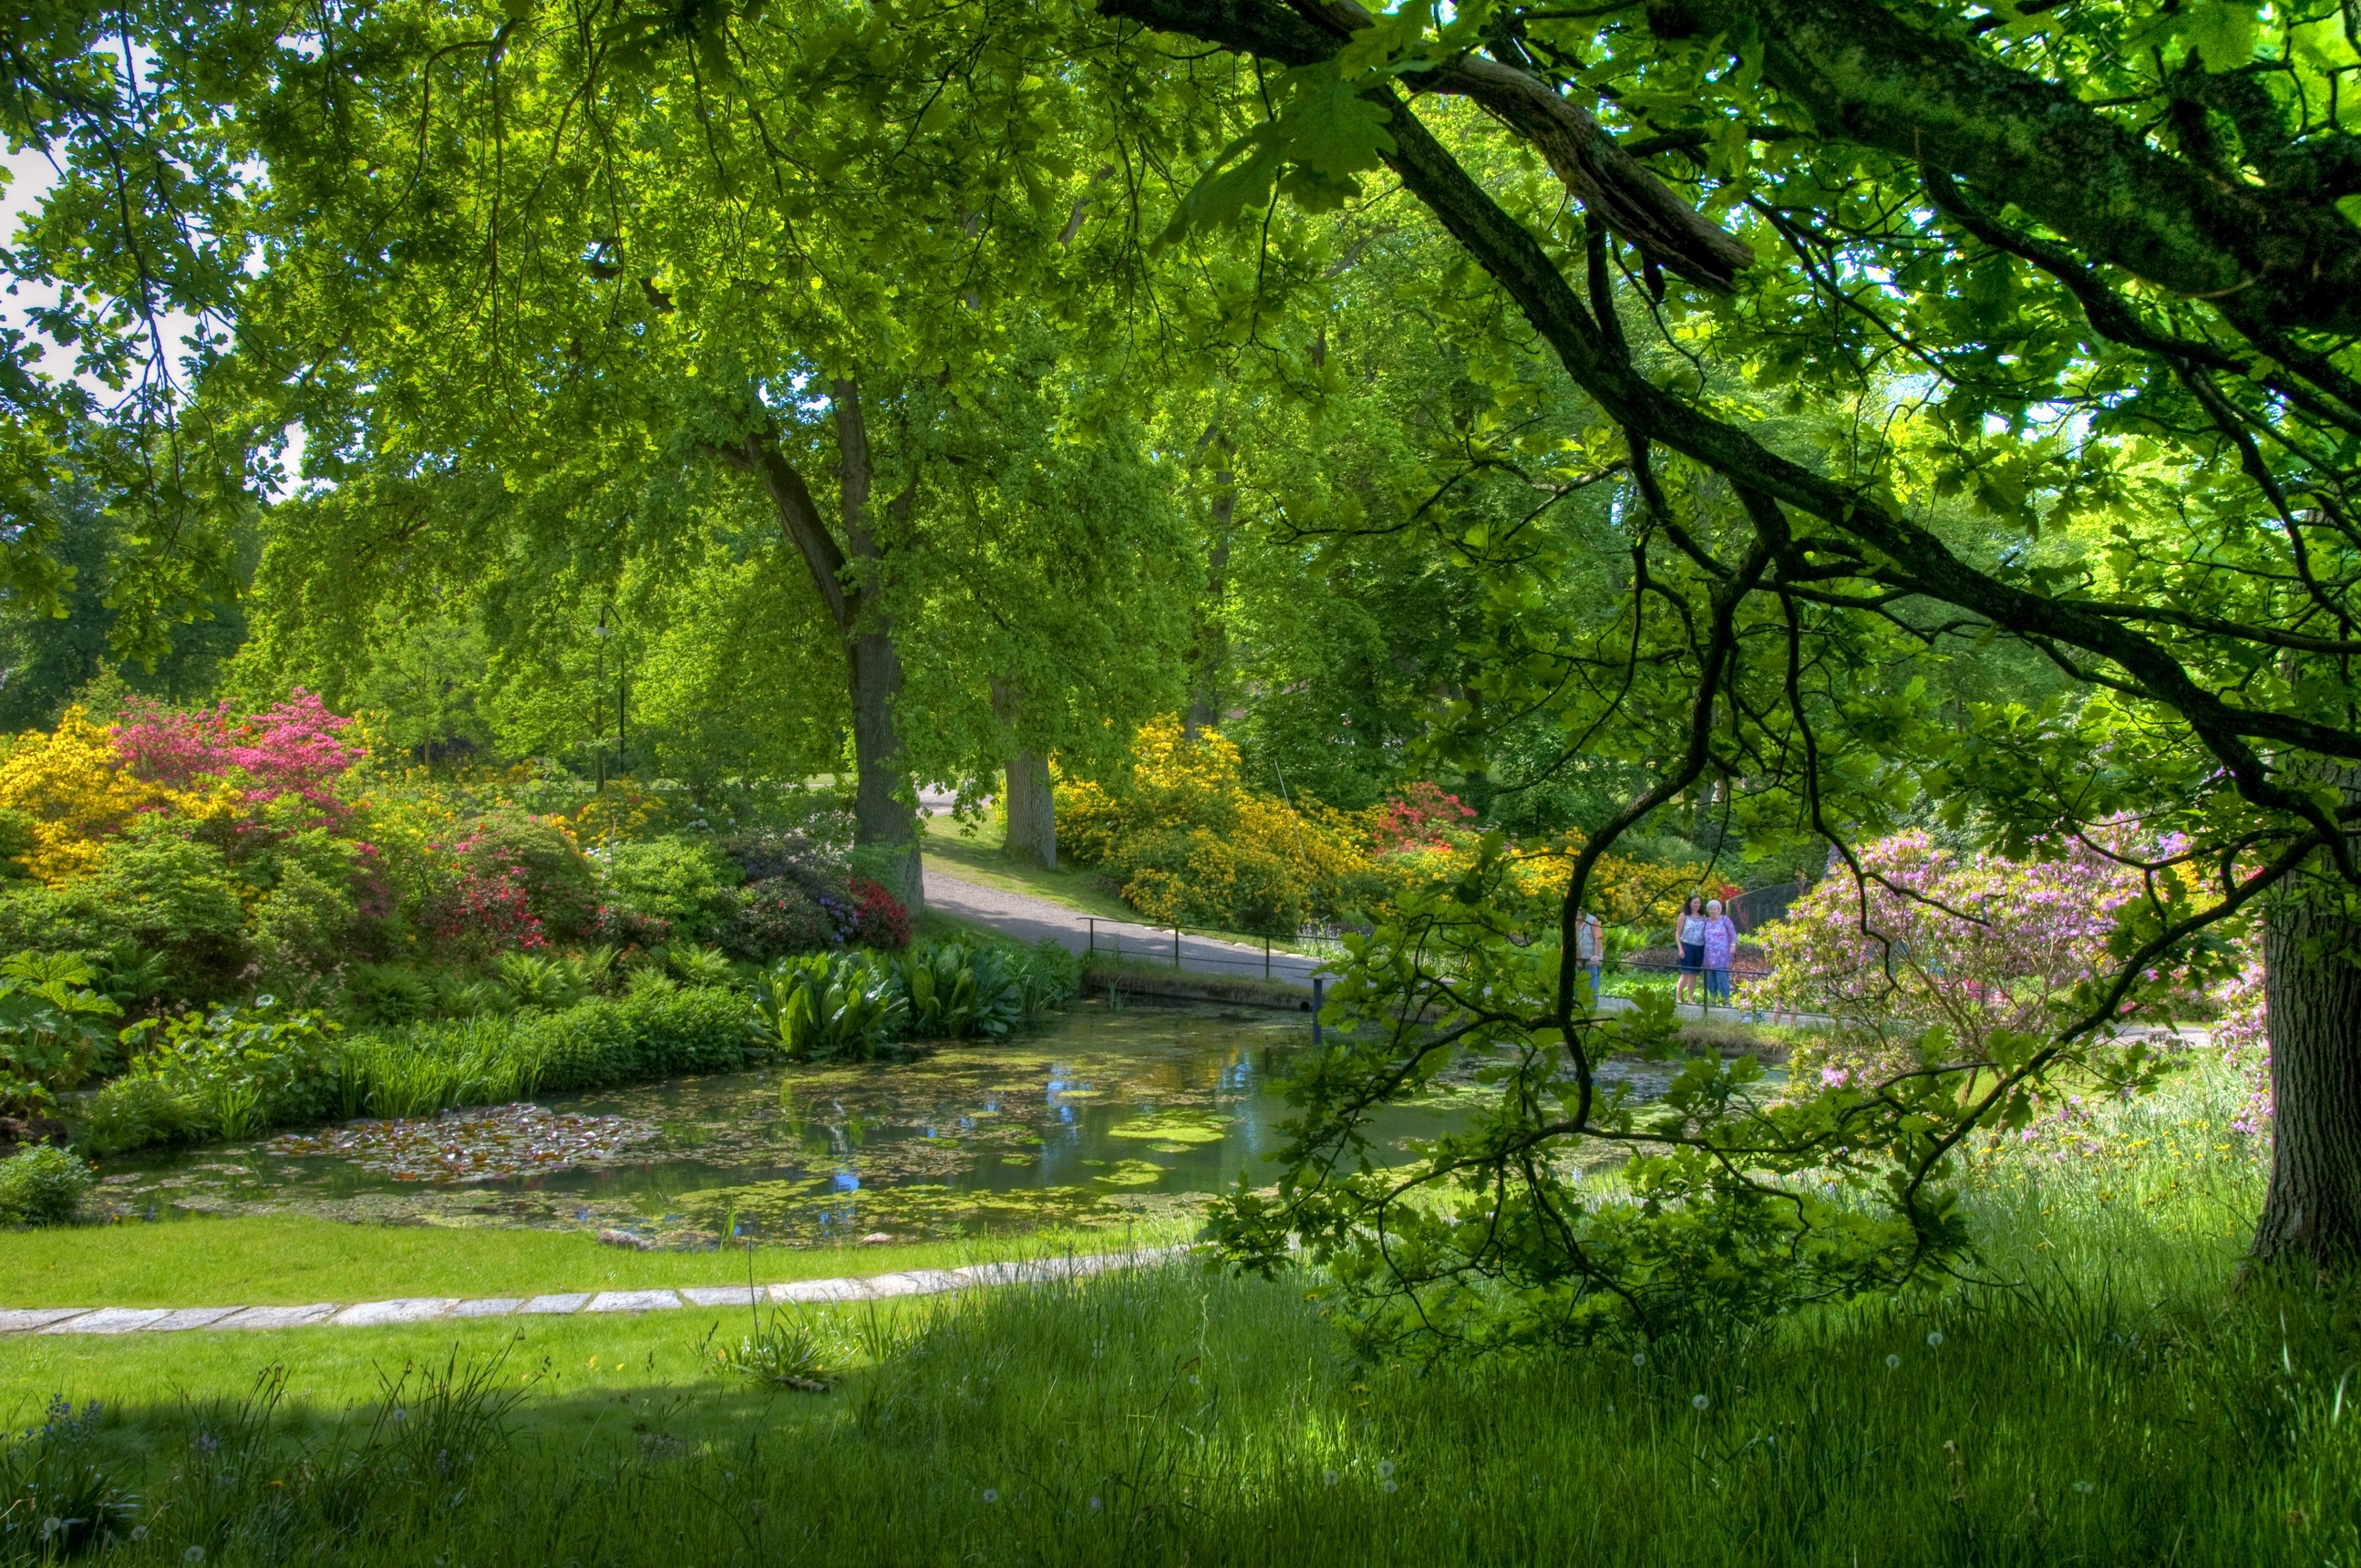 garden, green, people, nature, trees, pond, serenity lock screen backgrounds